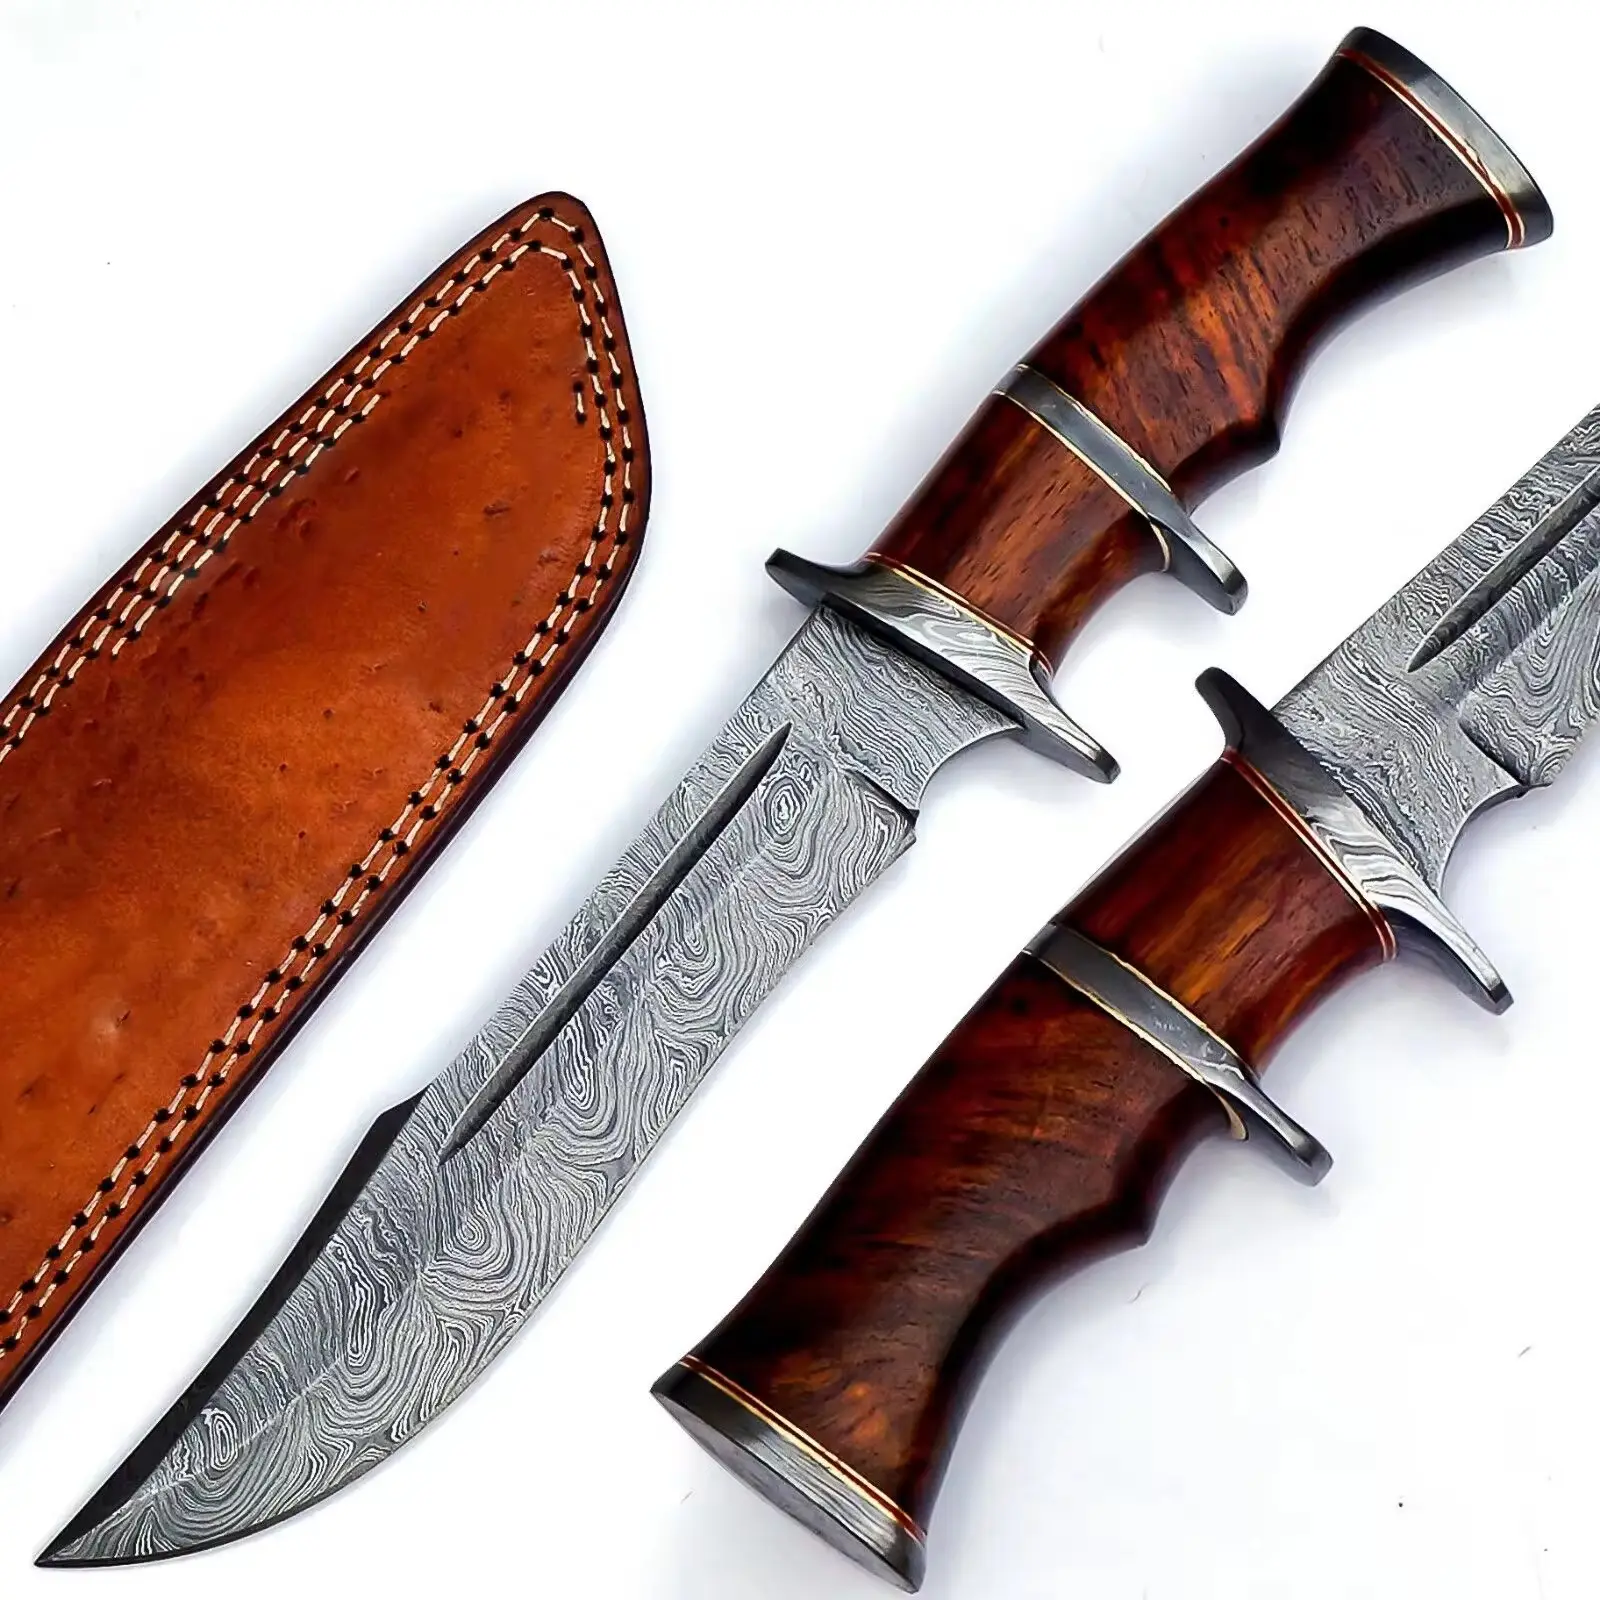 New Arrival Handmade Damascus Steel Skinner Hunting Knife With Leather Sheath and Wooden Handle for Sale